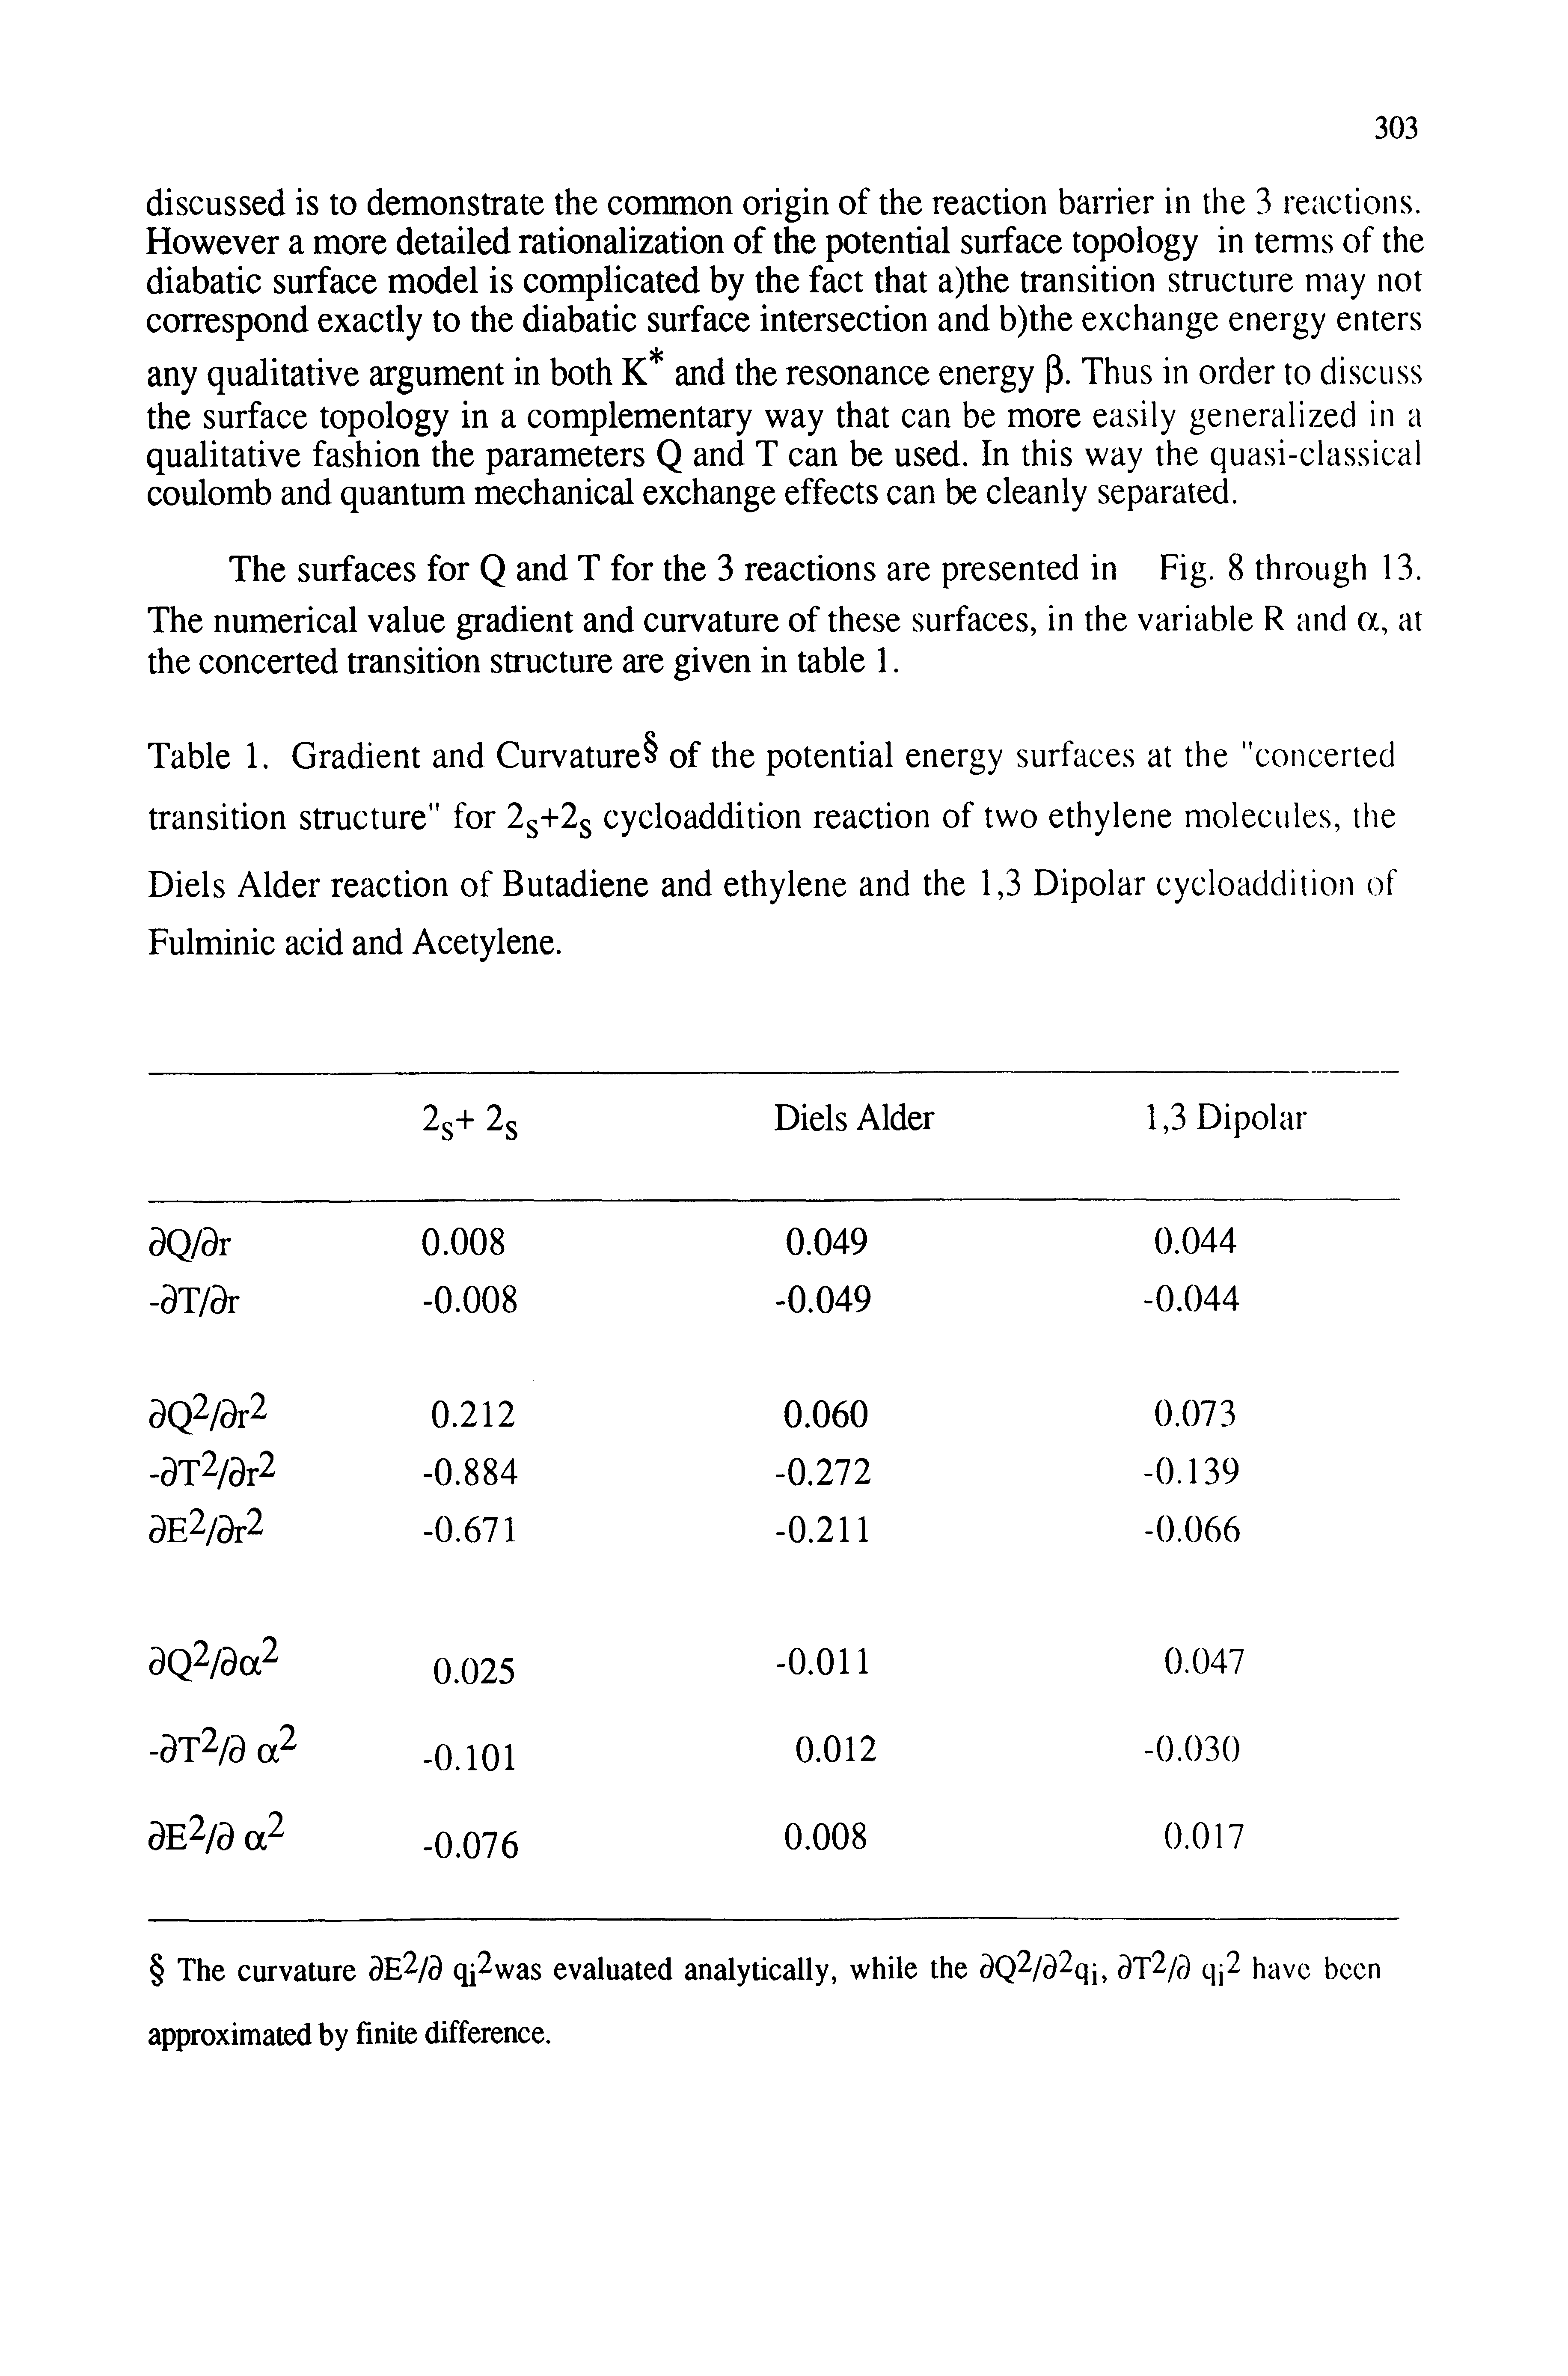 Table 1. Gradient and Curvature of the potential energy surfaces at the "concerted transition structure" for cycloaddition reaction of two ethylene molecules, the Diels Alder reaction of Butadiene and ethylene and the 1,3 Dipolar cycloaddition of Fulminic acid and Acetylene.